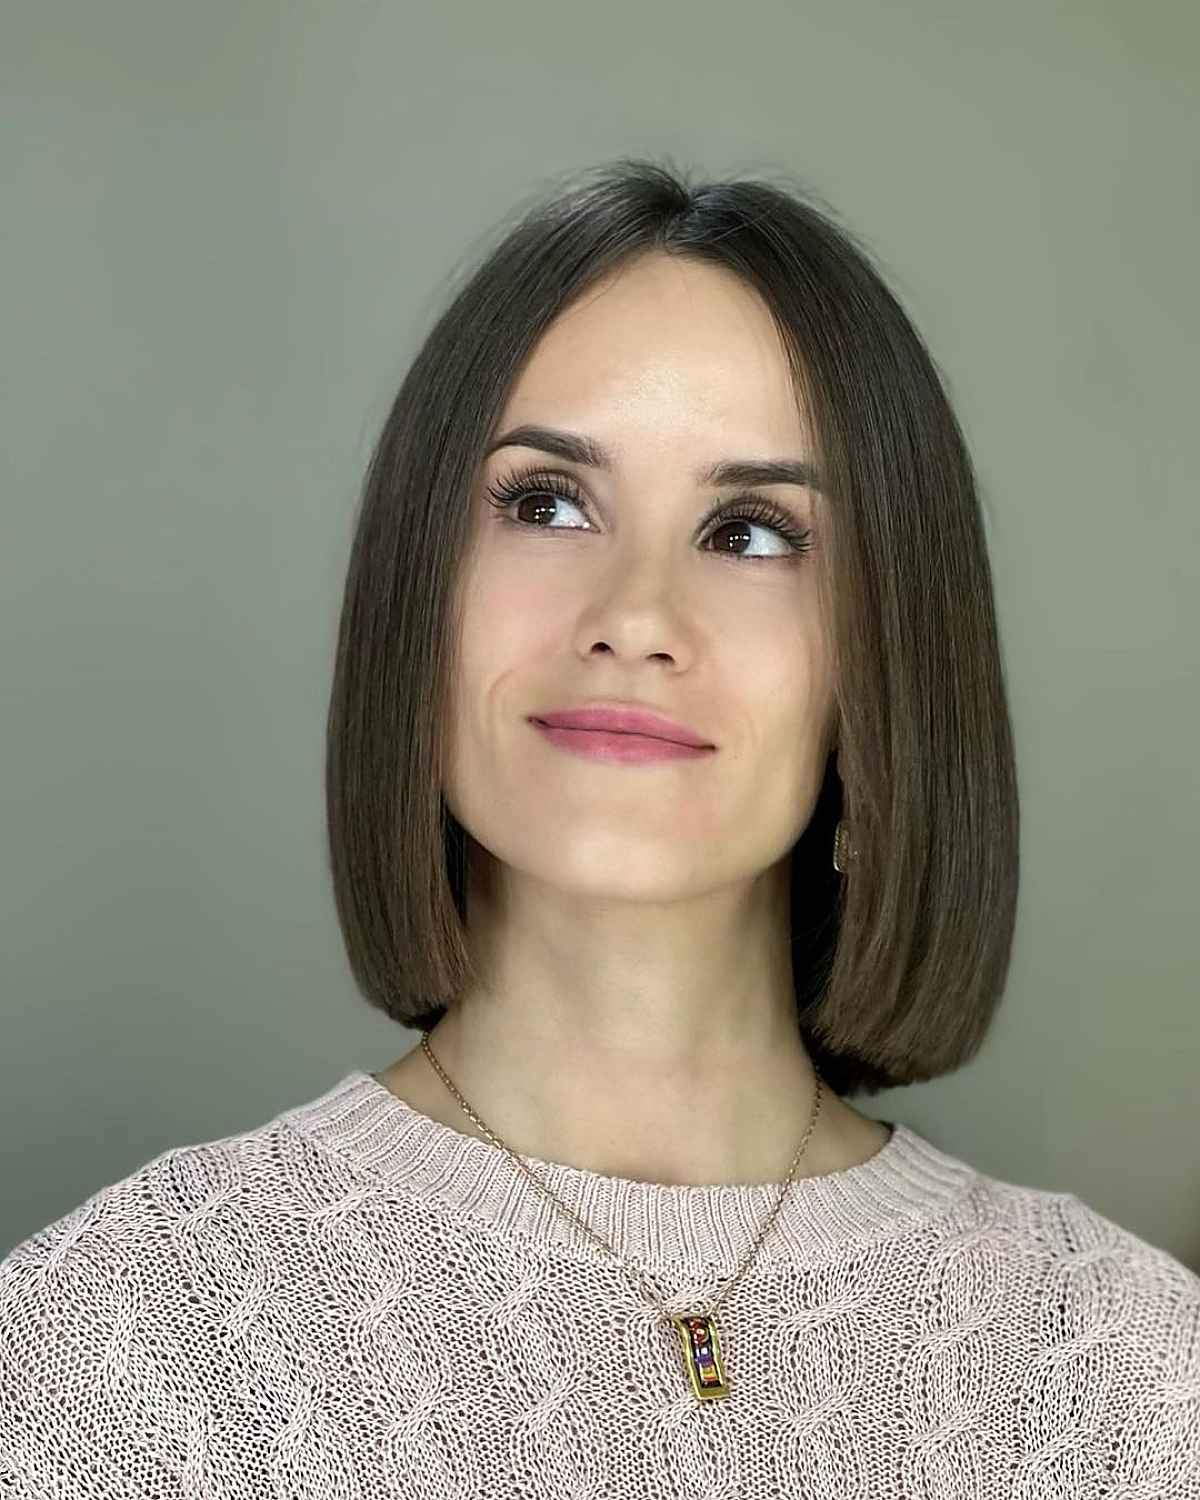 Neck-Length Blunt Bob for Square Faces